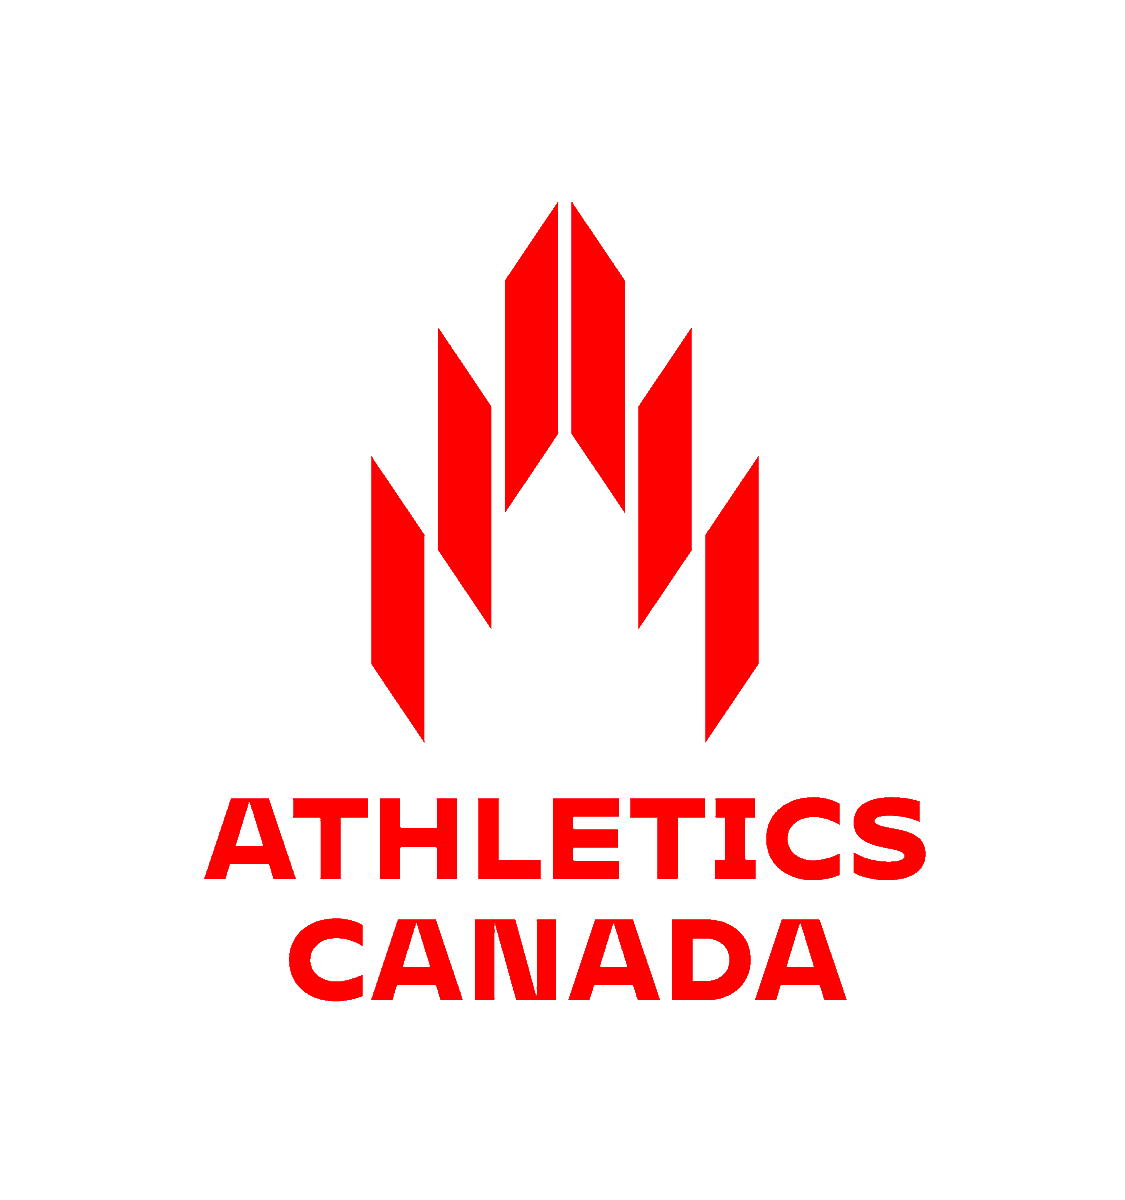 David Bedford has left his post as Athletics Canada chief executive after discussions with the Board of Directors following revelations about sexually inappropriate remarks he made on Twitter ©Athletics Canada